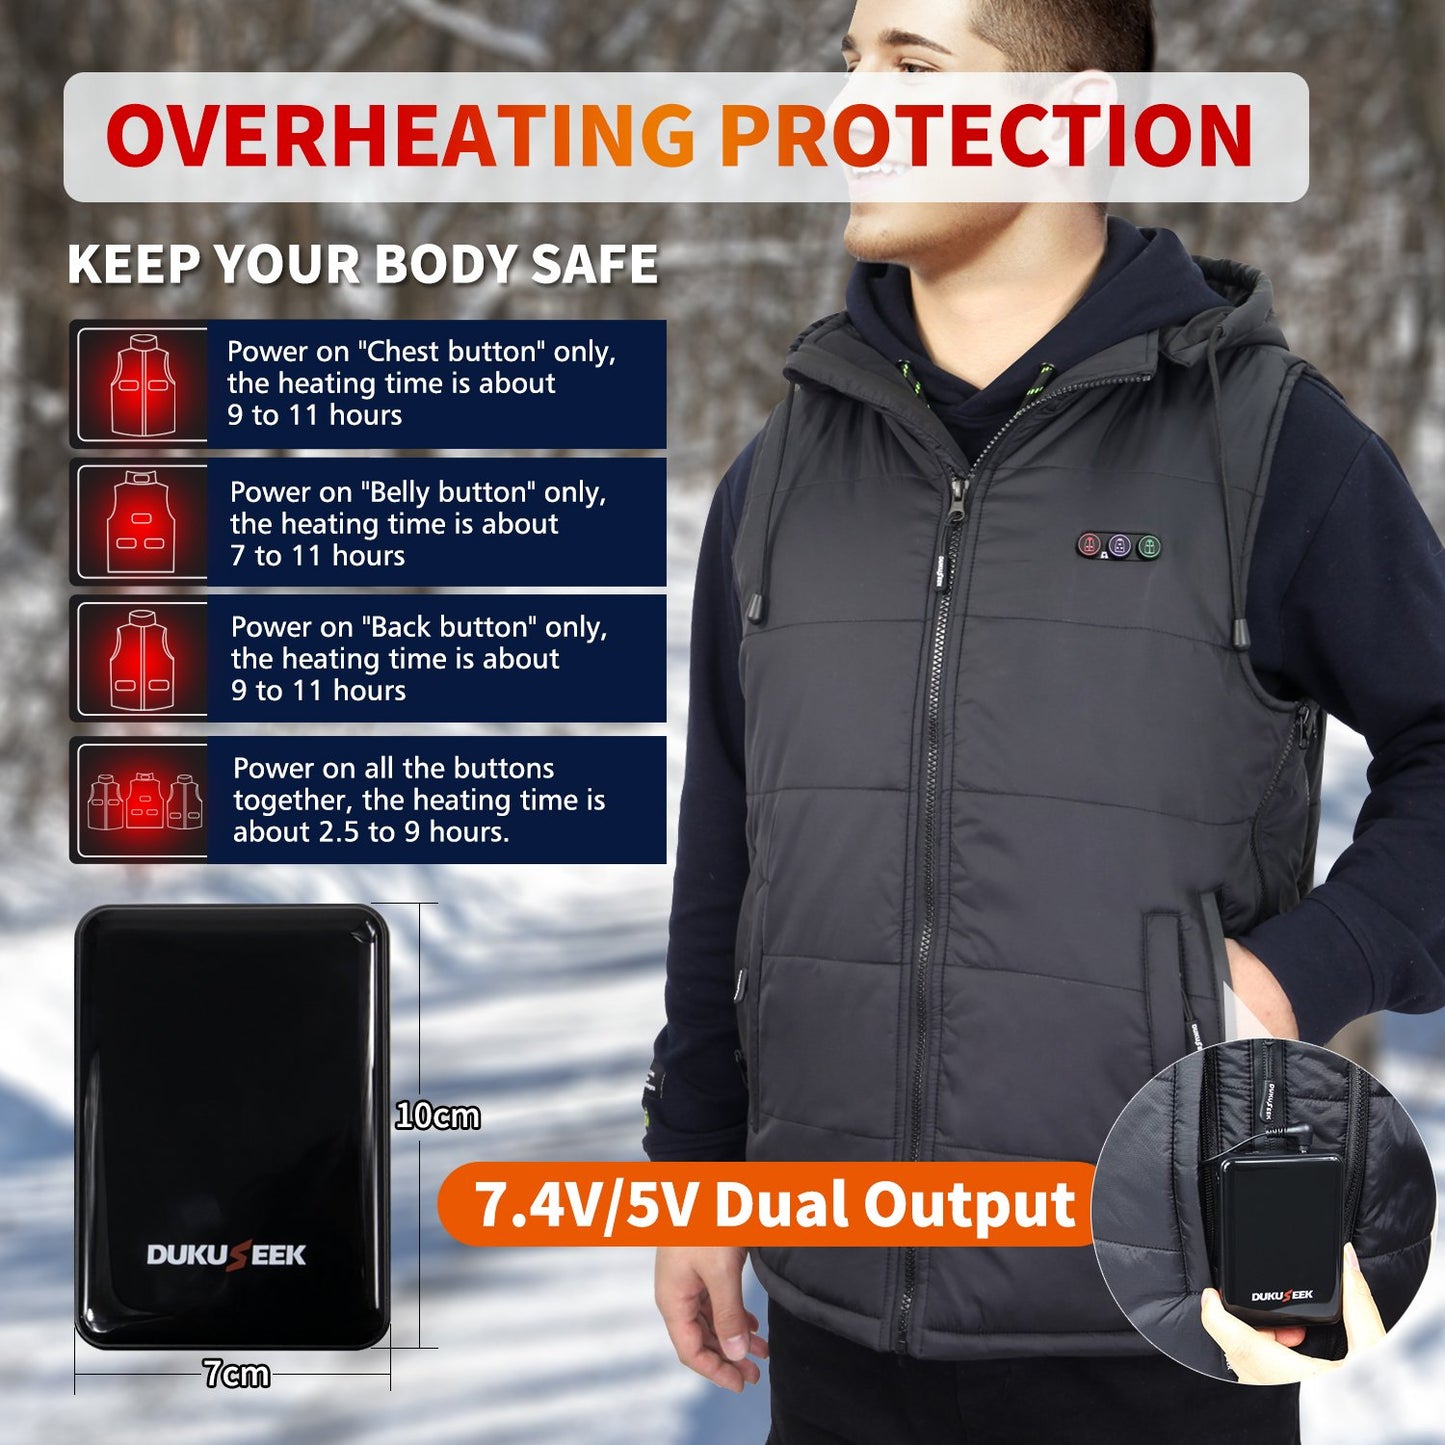 DUKUSEEK heated vest with rechargeable battery